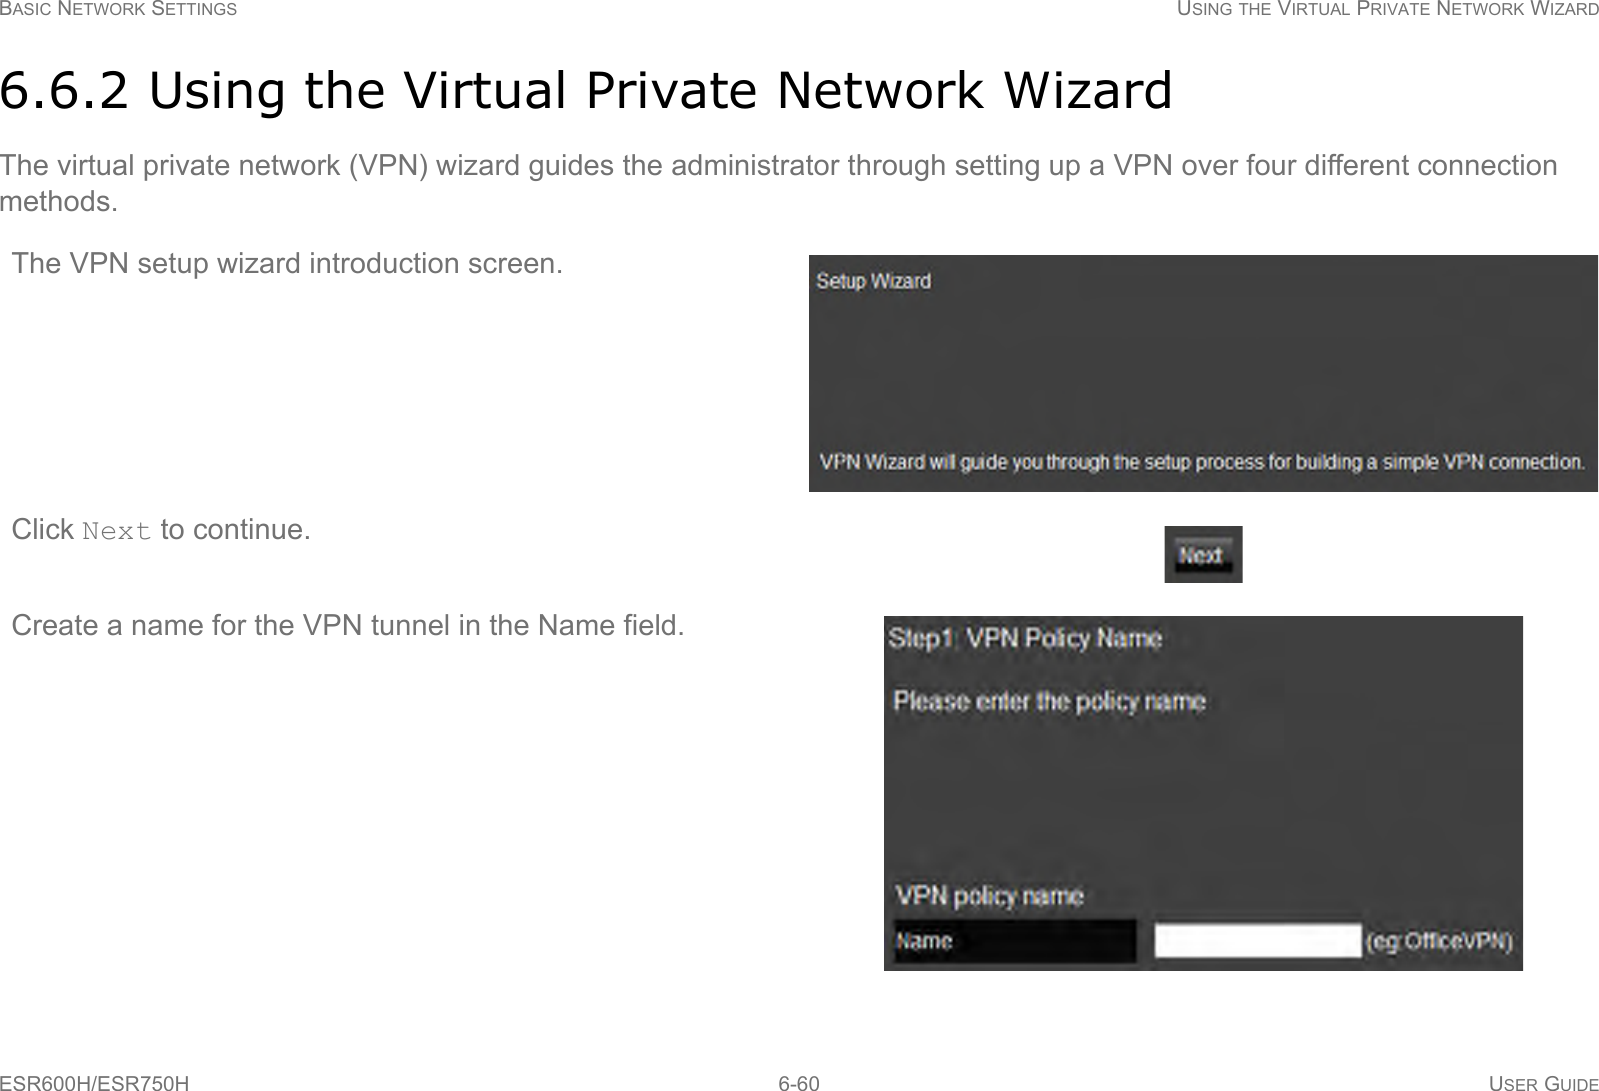 BASIC NETWORK SETTINGS USING THE VIRTUAL PRIVATE NETWORK WIZARDESR600H/ESR750H 6-60 USER GUIDE6.6.2 Using the Virtual Private Network WizardThe virtual private network (VPN) wizard guides the administrator through setting up a VPN over four different connection methods.The VPN setup wizard introduction screen.Click Next to continue.Create a name for the VPN tunnel in the Name field.